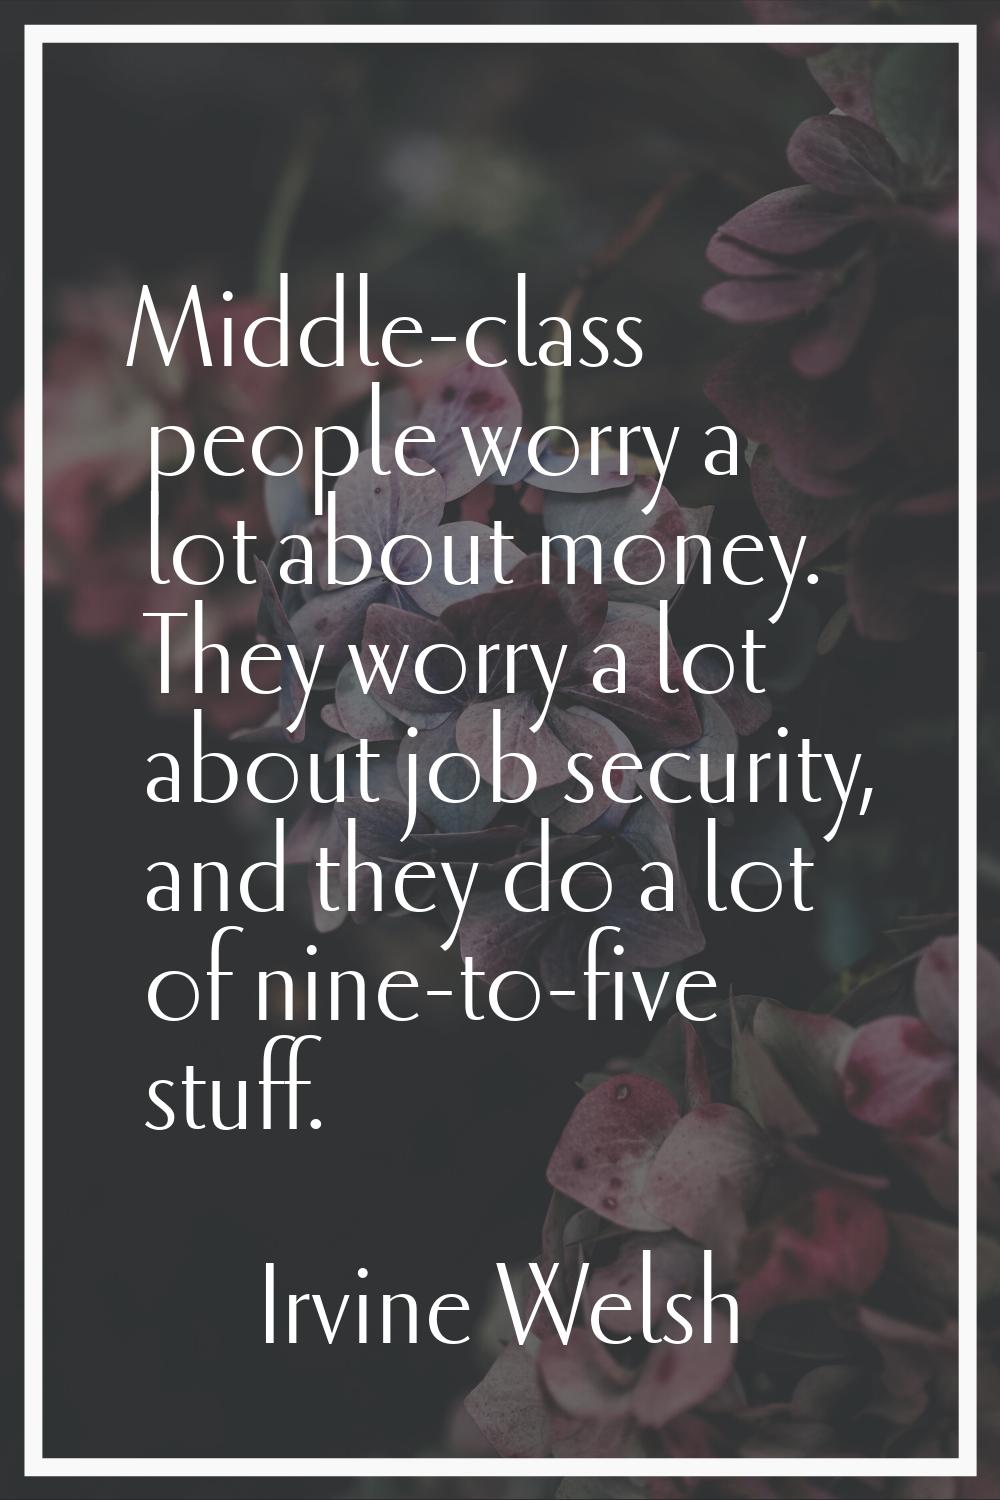 Middle-class people worry a lot about money. They worry a lot about job security, and they do a lot